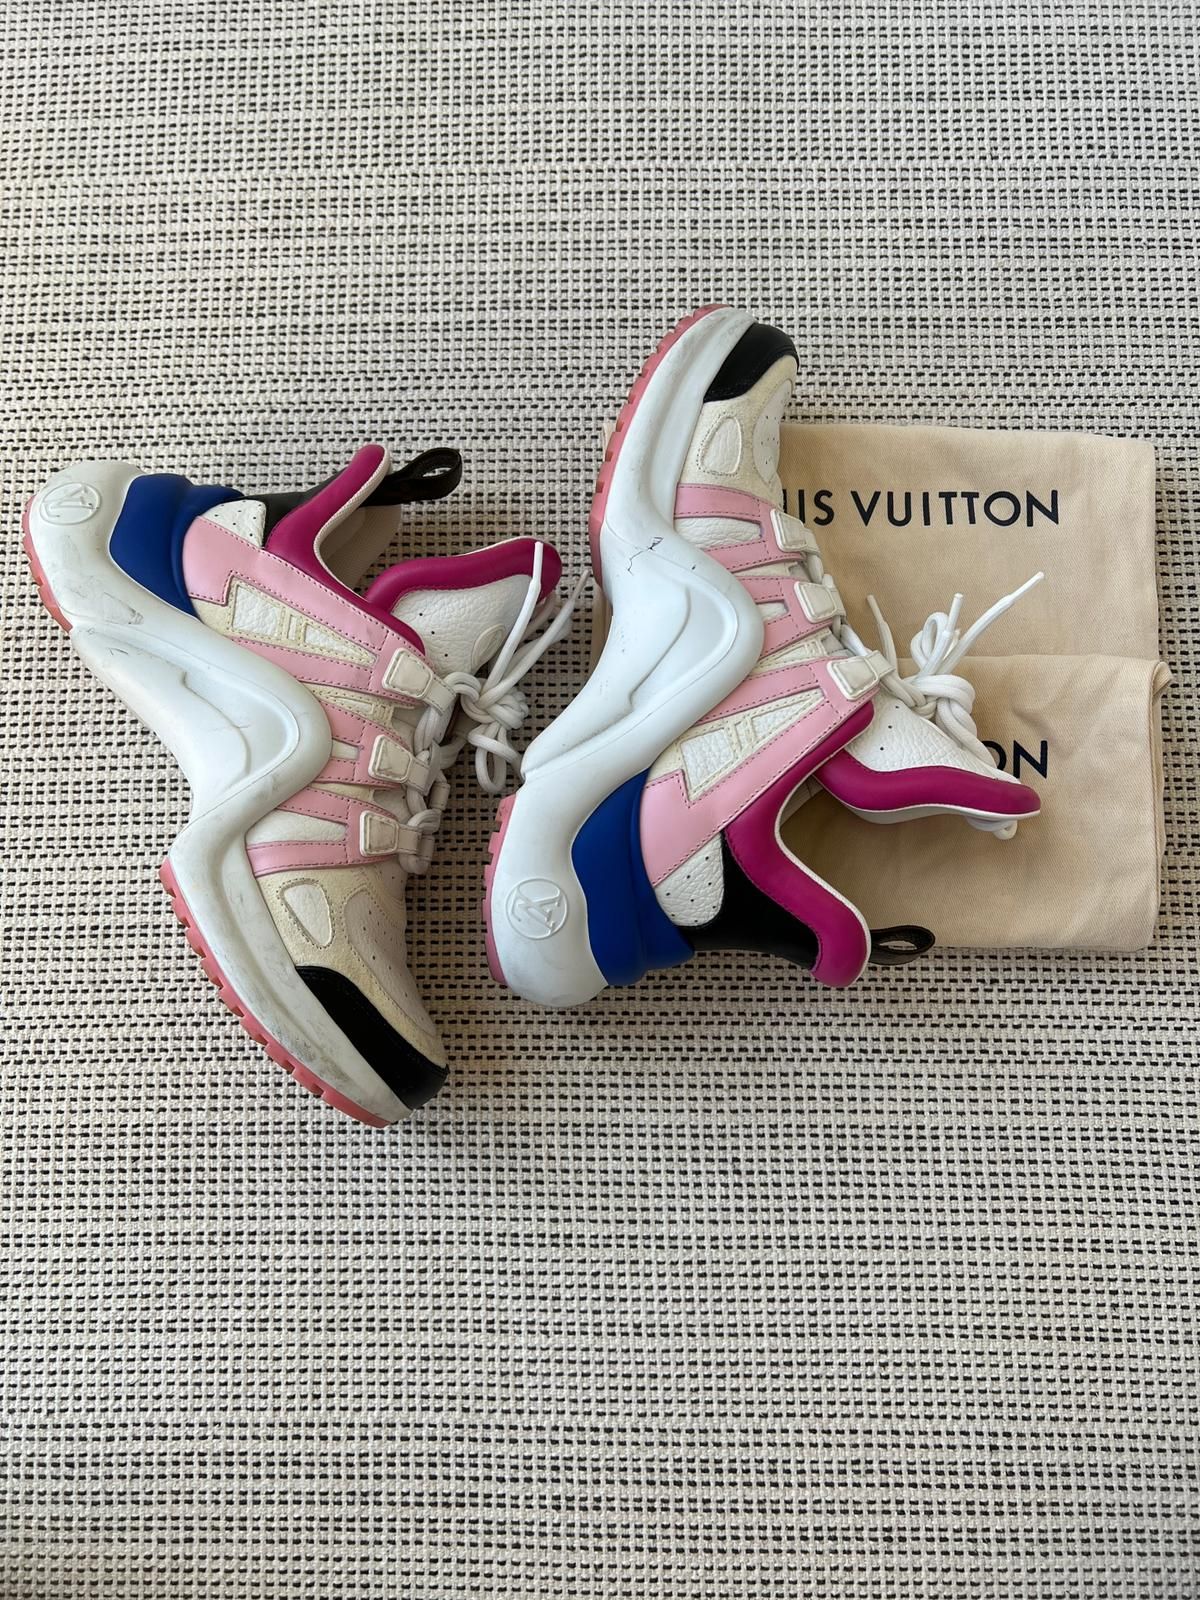 Louis Vuitton LV archlight iconic women's sneaker pink and blue